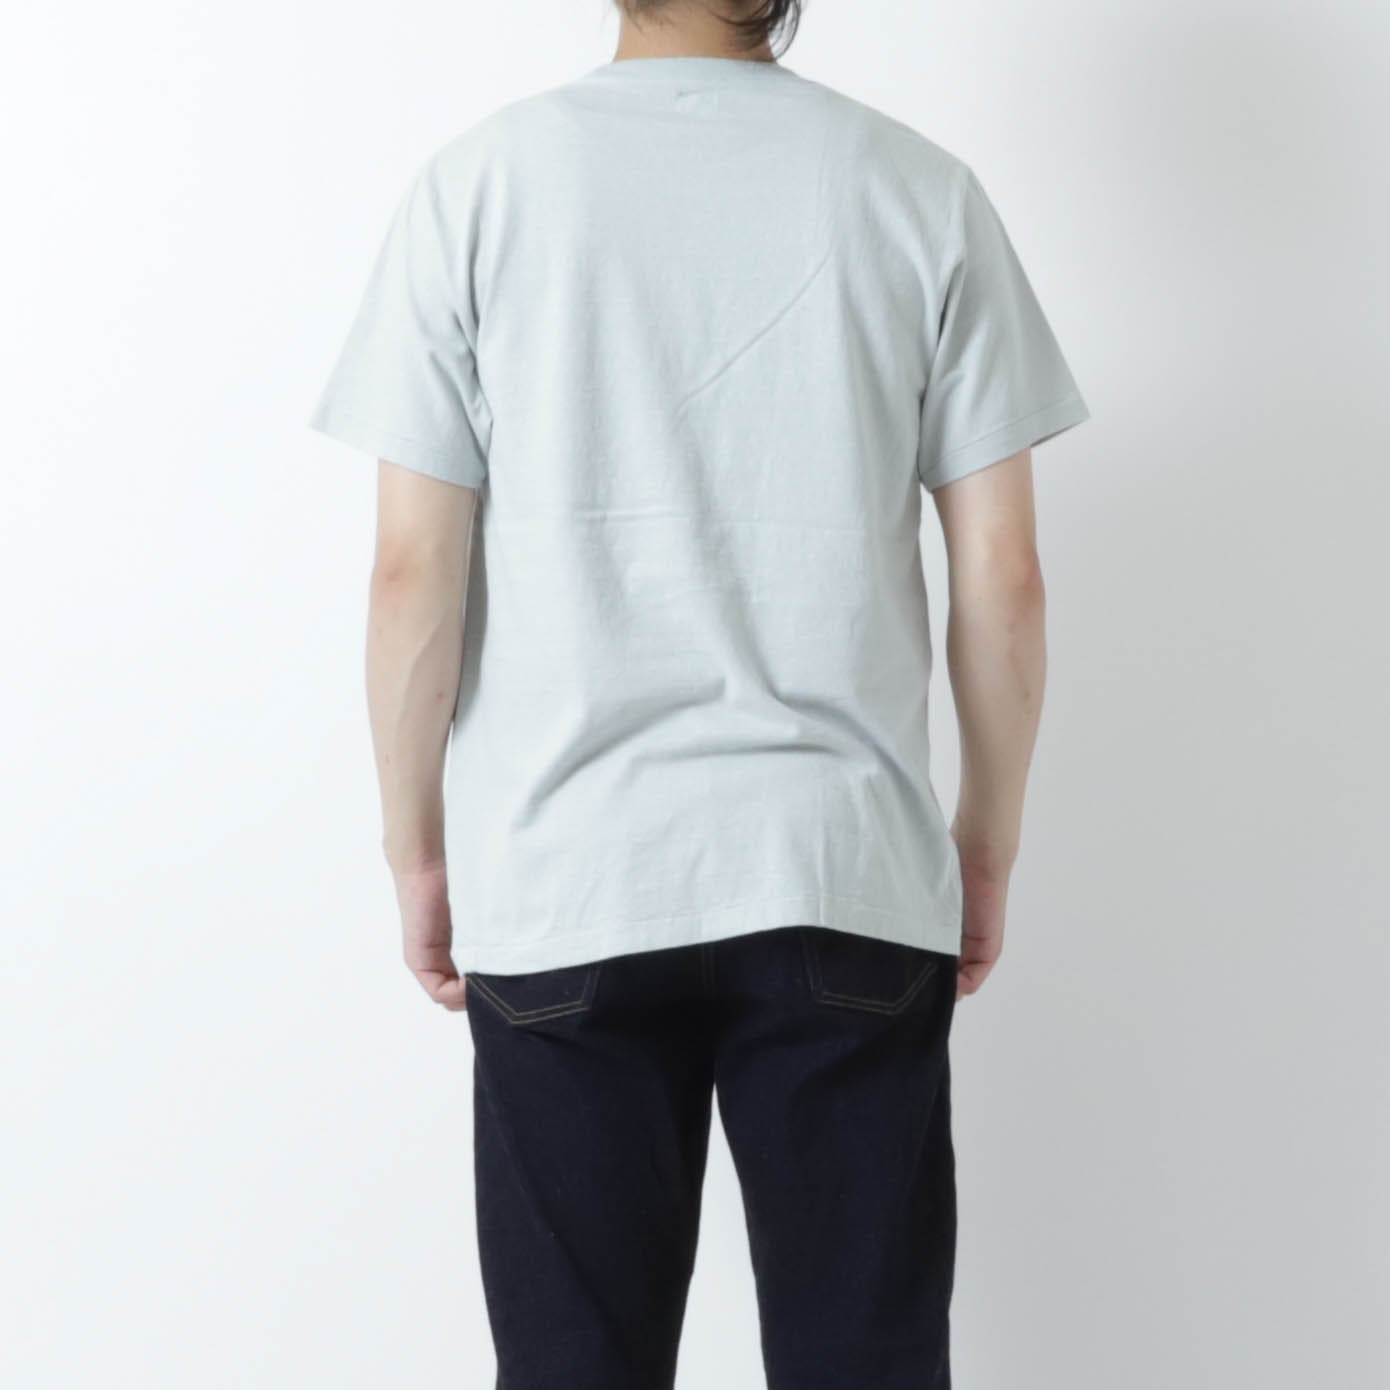 Printed Tee【STATE OF SHOCK】_HEATHER GRAY 